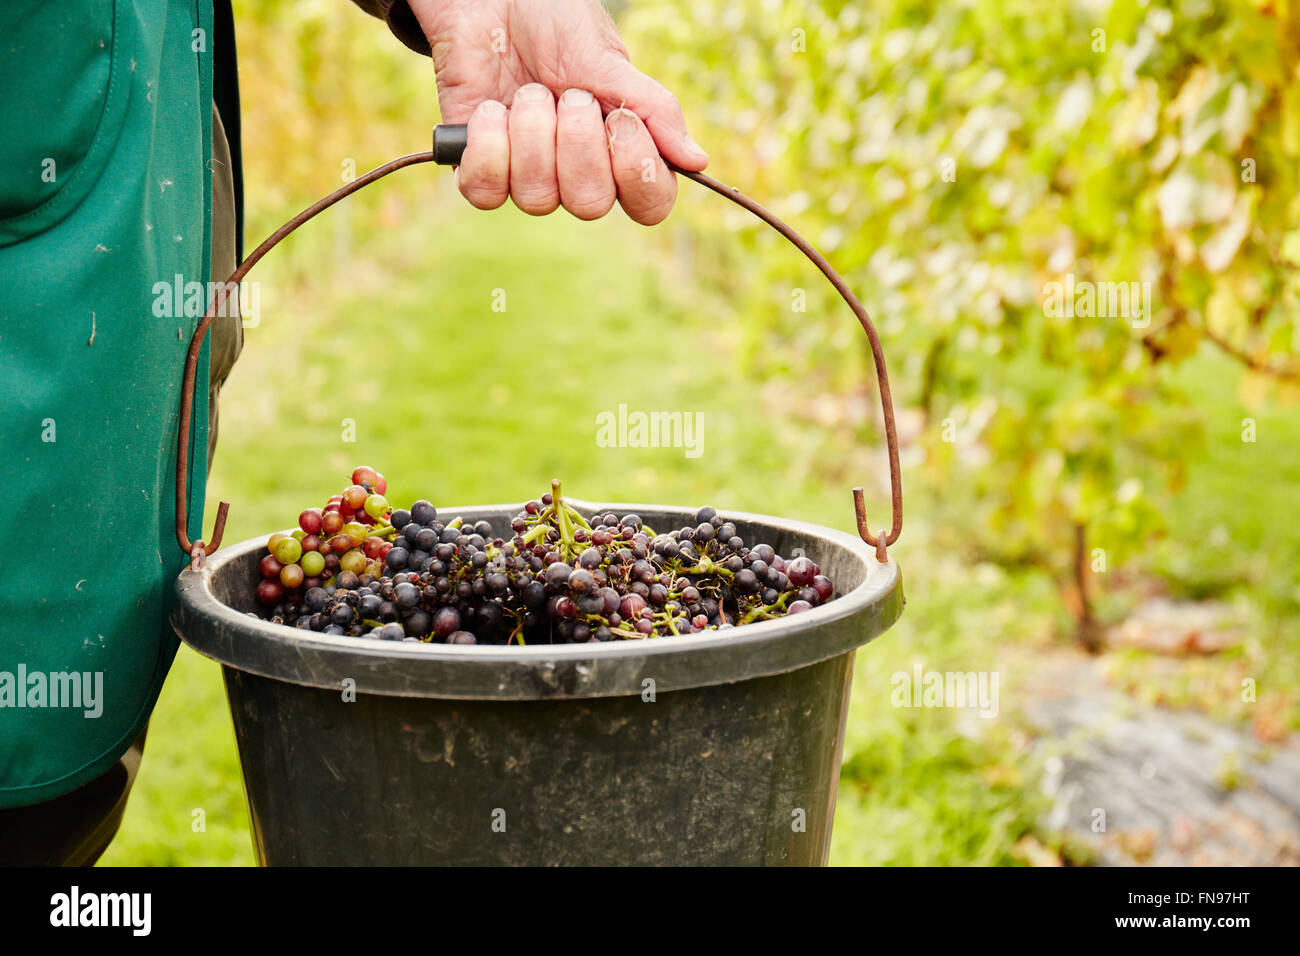 A person carrying a bucket laden with grapes. Stock Photo